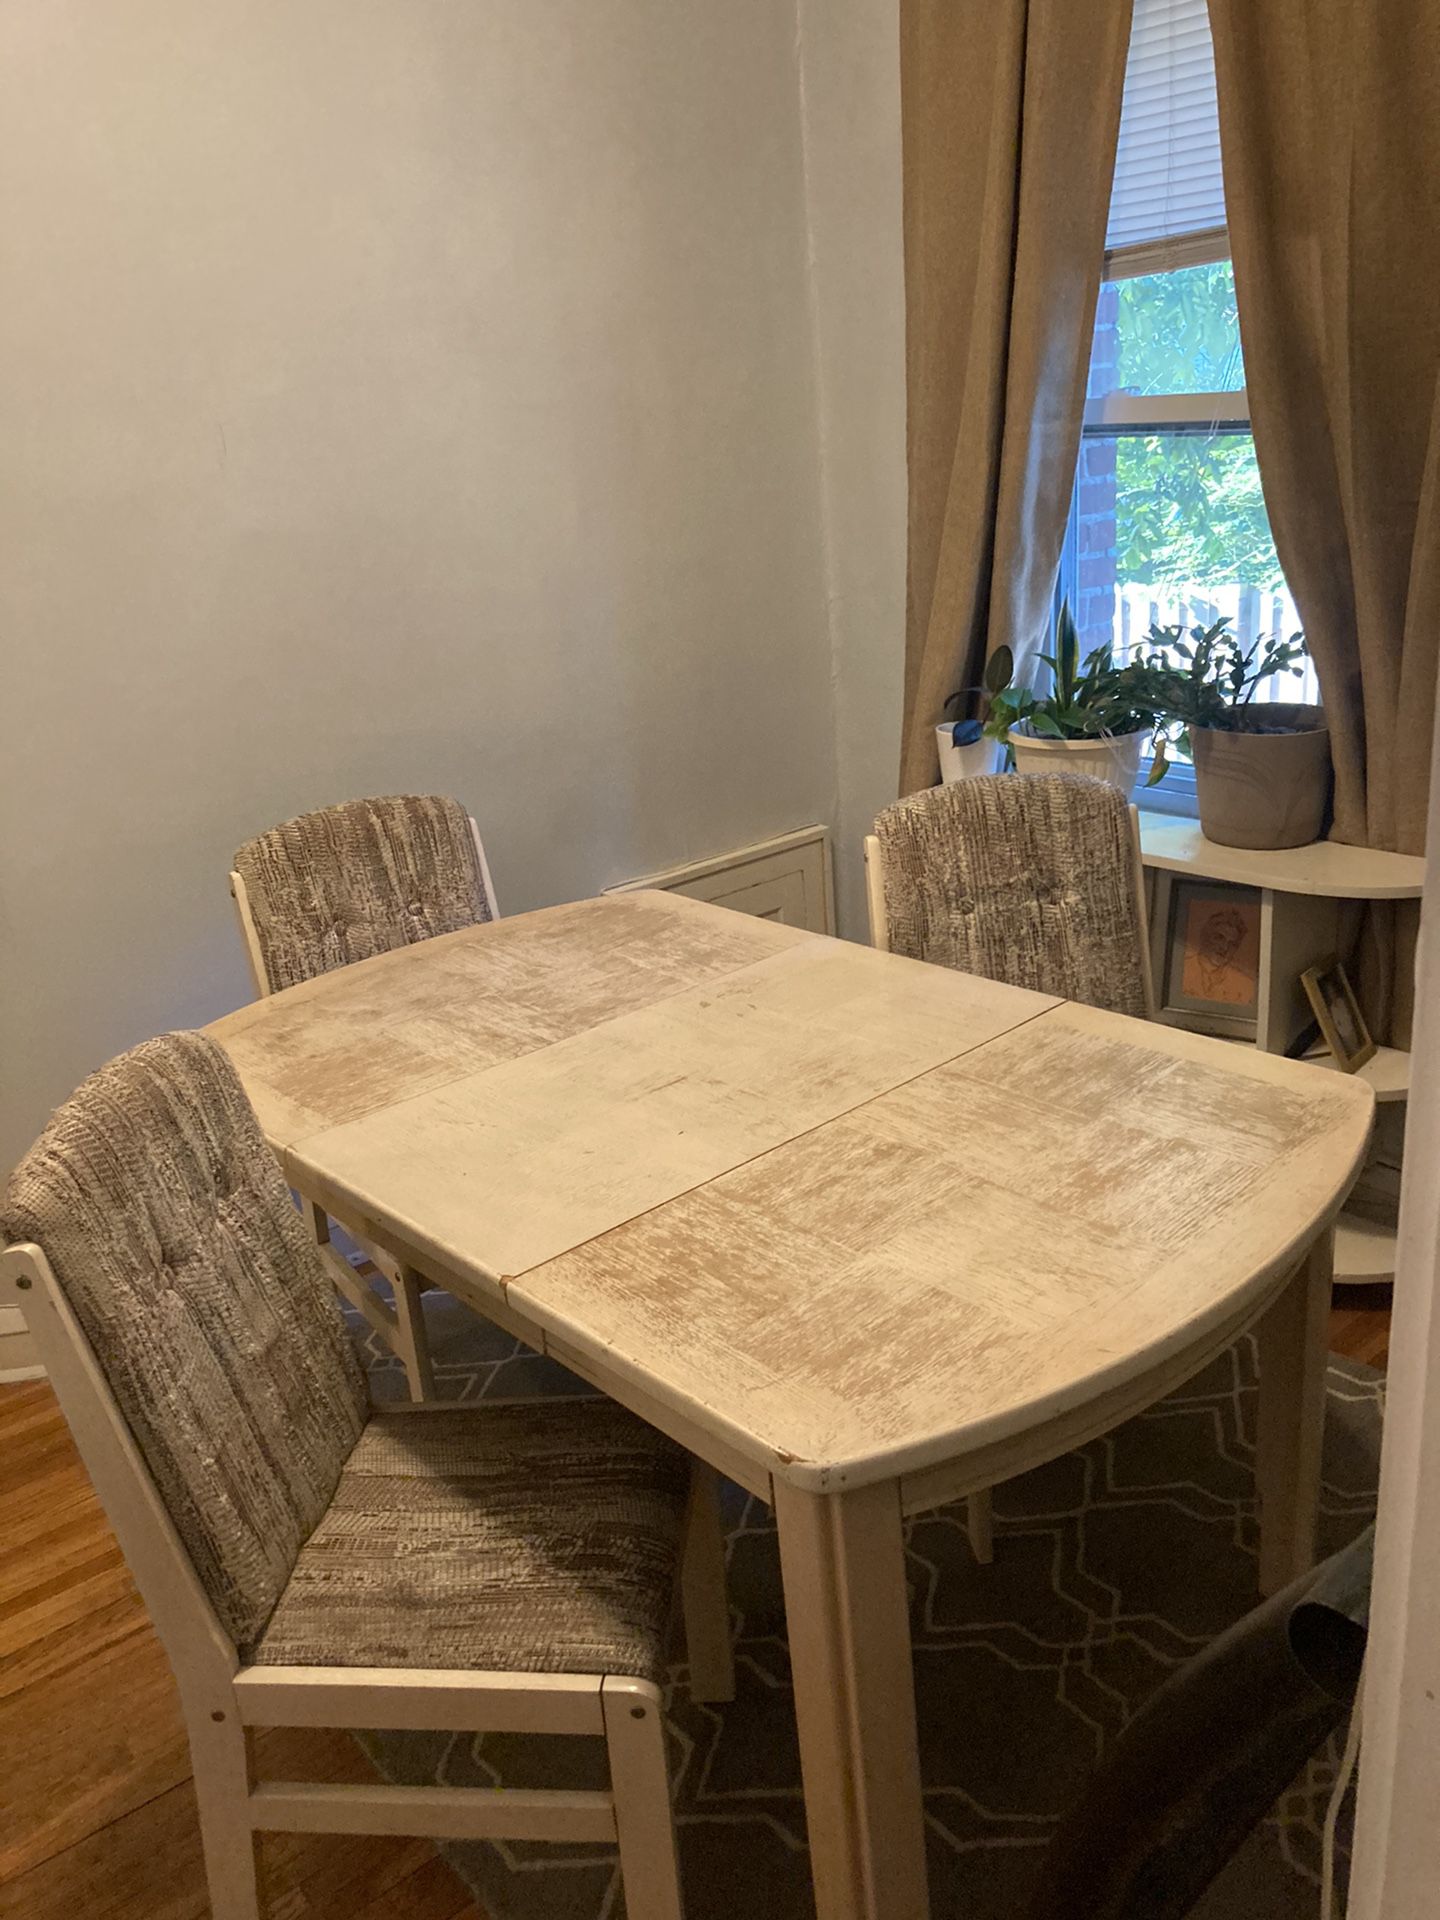 Kitchen table with 4 chairs + leaf